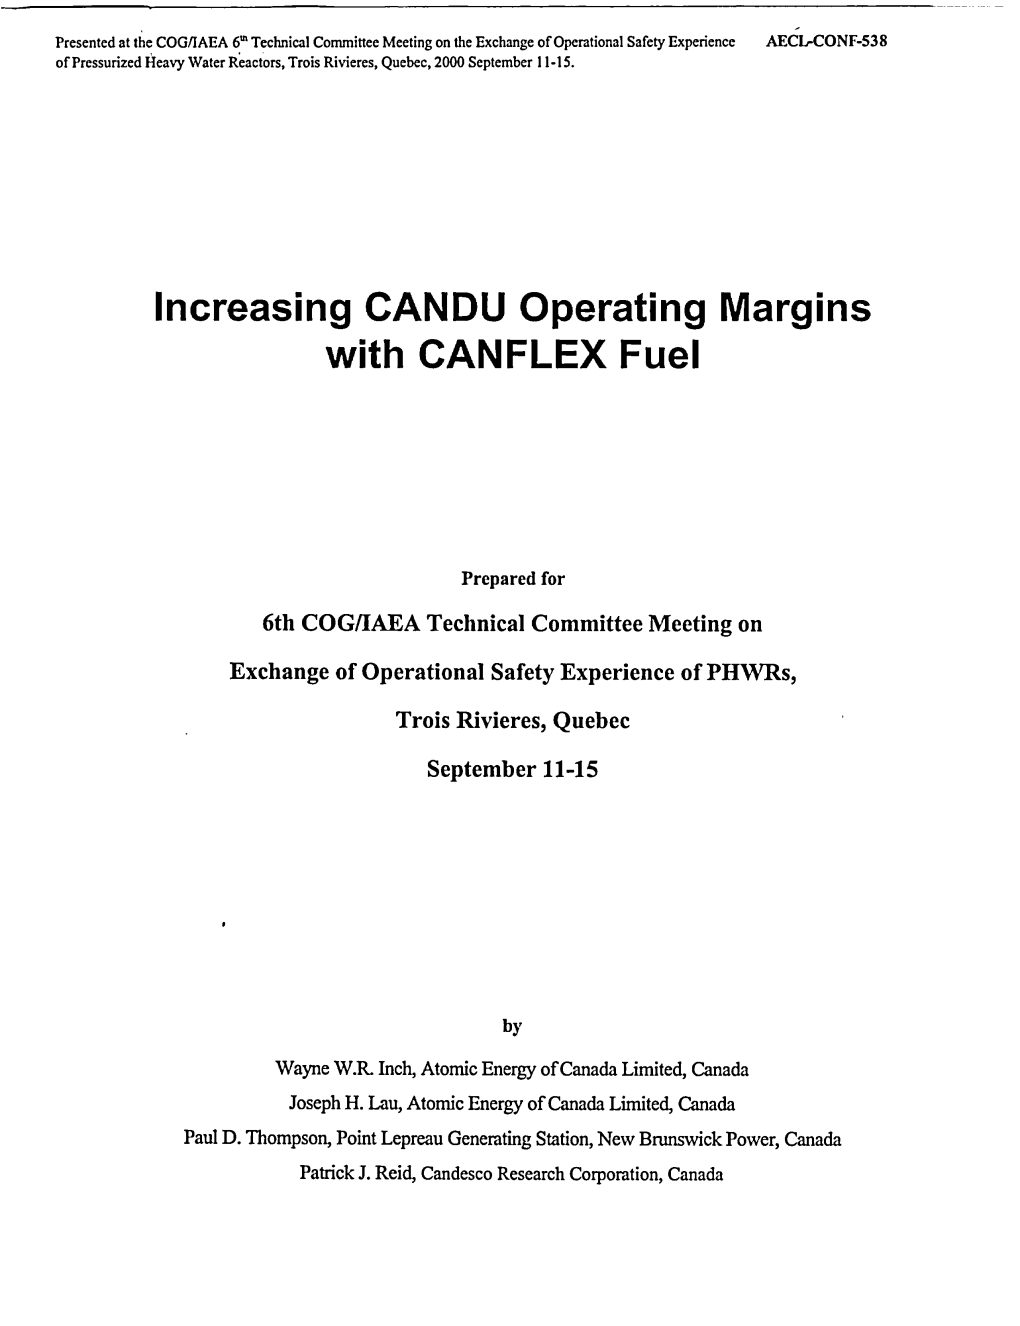 Increasing CANDU Operating Margins with CANFLEX Fuel